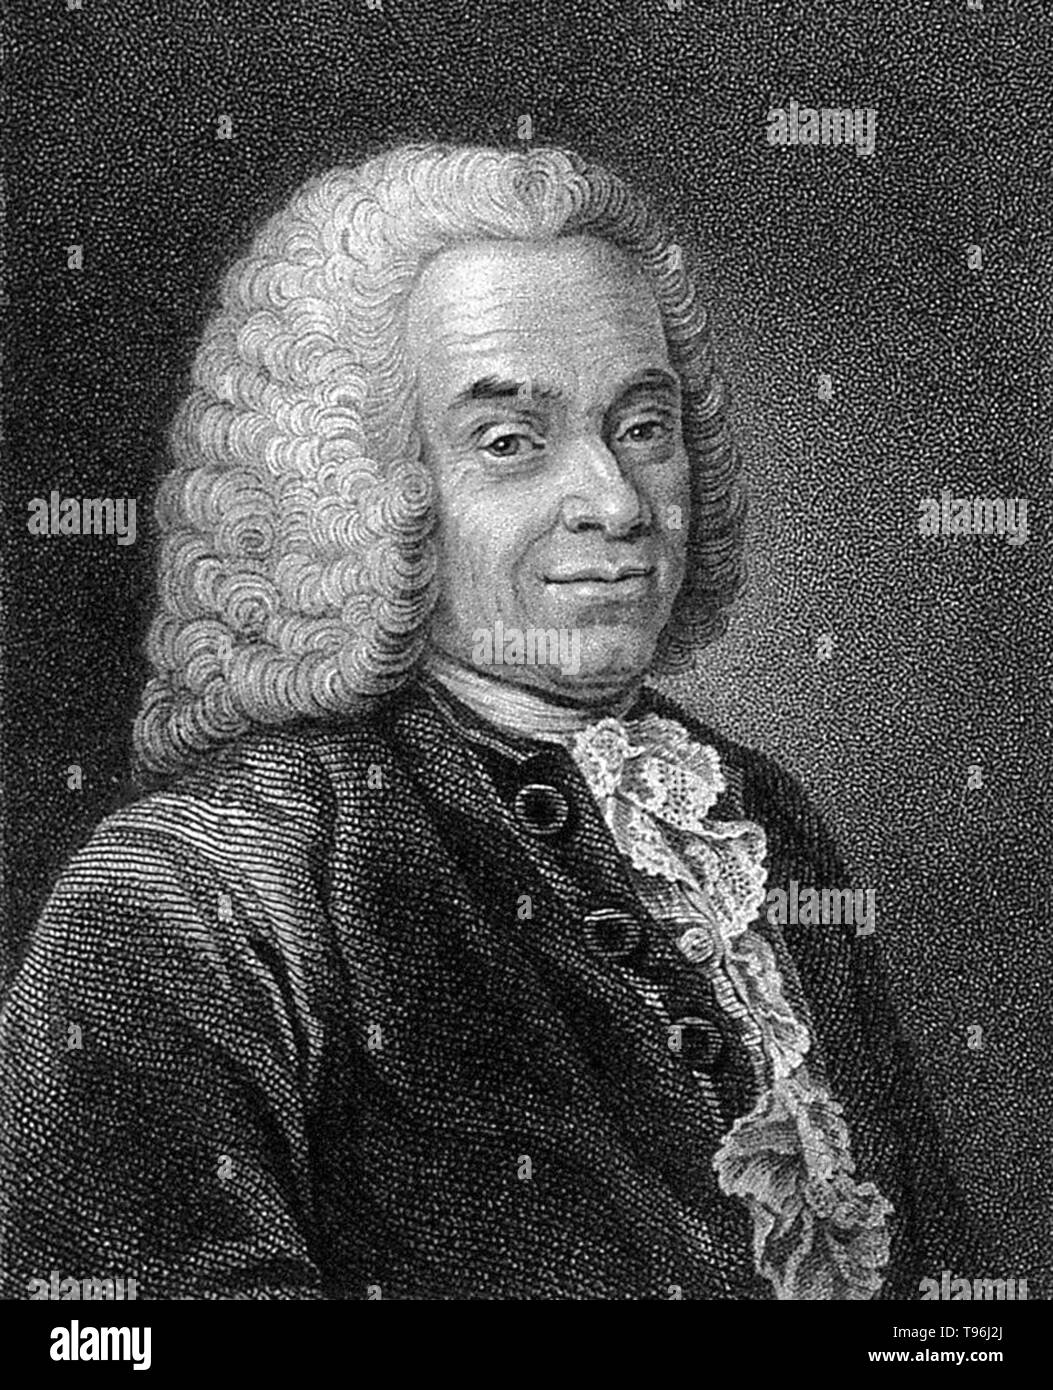 Francois Quesnay (June 4, 1694 - December 16, 1774) was a French economist and physician. He studied medicine in Paris, and became physician to King Louis XV of France. From the late 1740s he began to devote more time to the study of economics, gathering around him a group of leading economic thinkers (the Physiocrates). He published the 'Tableau économique' (Economic Table) in 1758, which provided the foundations of the ideas of the Physiocrats. Stock Photo